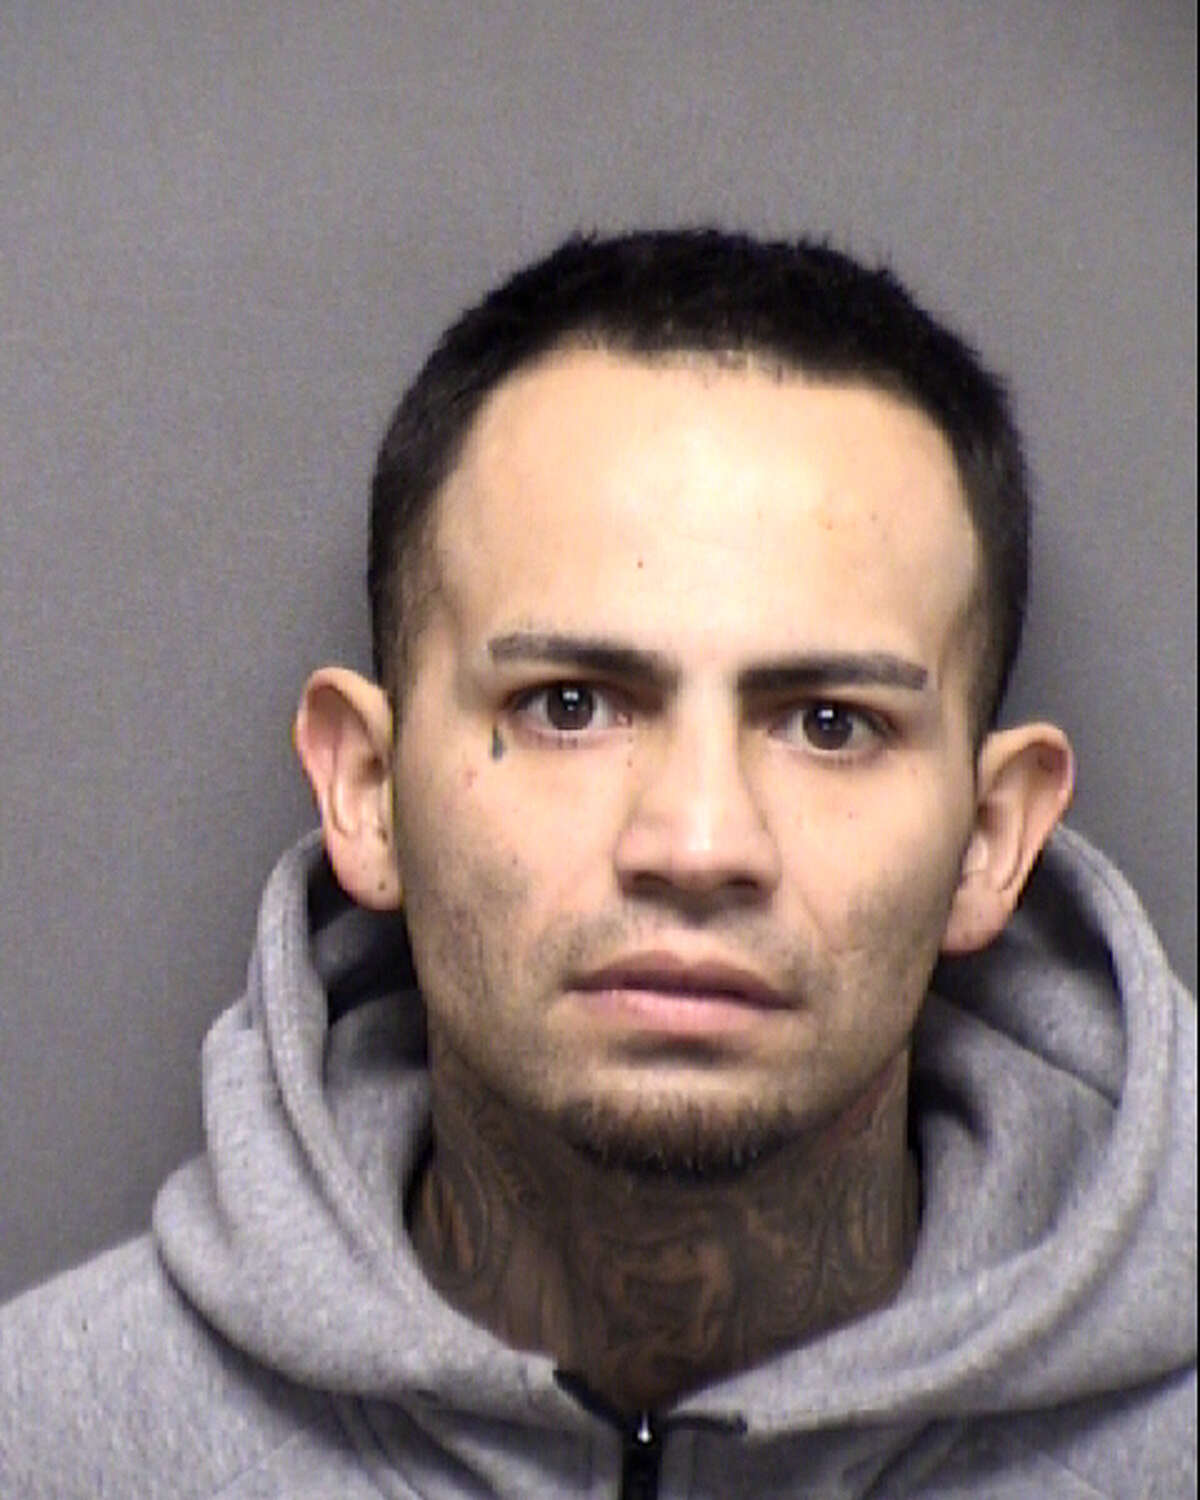 Joseph Garcia was apprehended after the Bexar County Sheriff's Office said he punched a deputy as he was trying to run from authorities Tuesday afternoon.